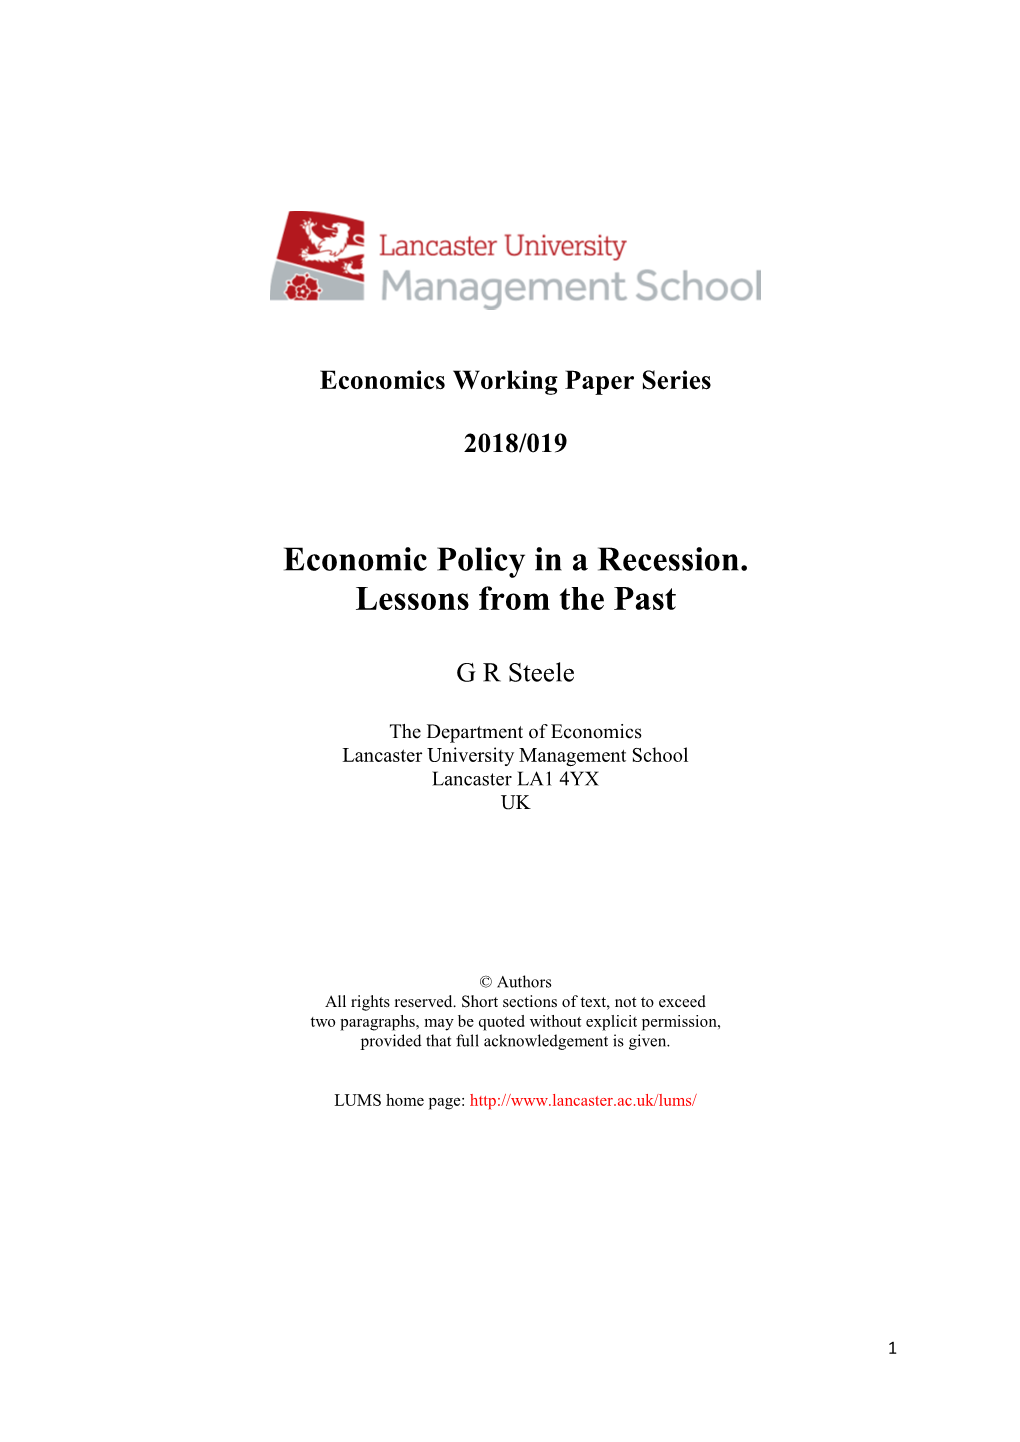 Economic Policy in a Recession. Lessons from the Past